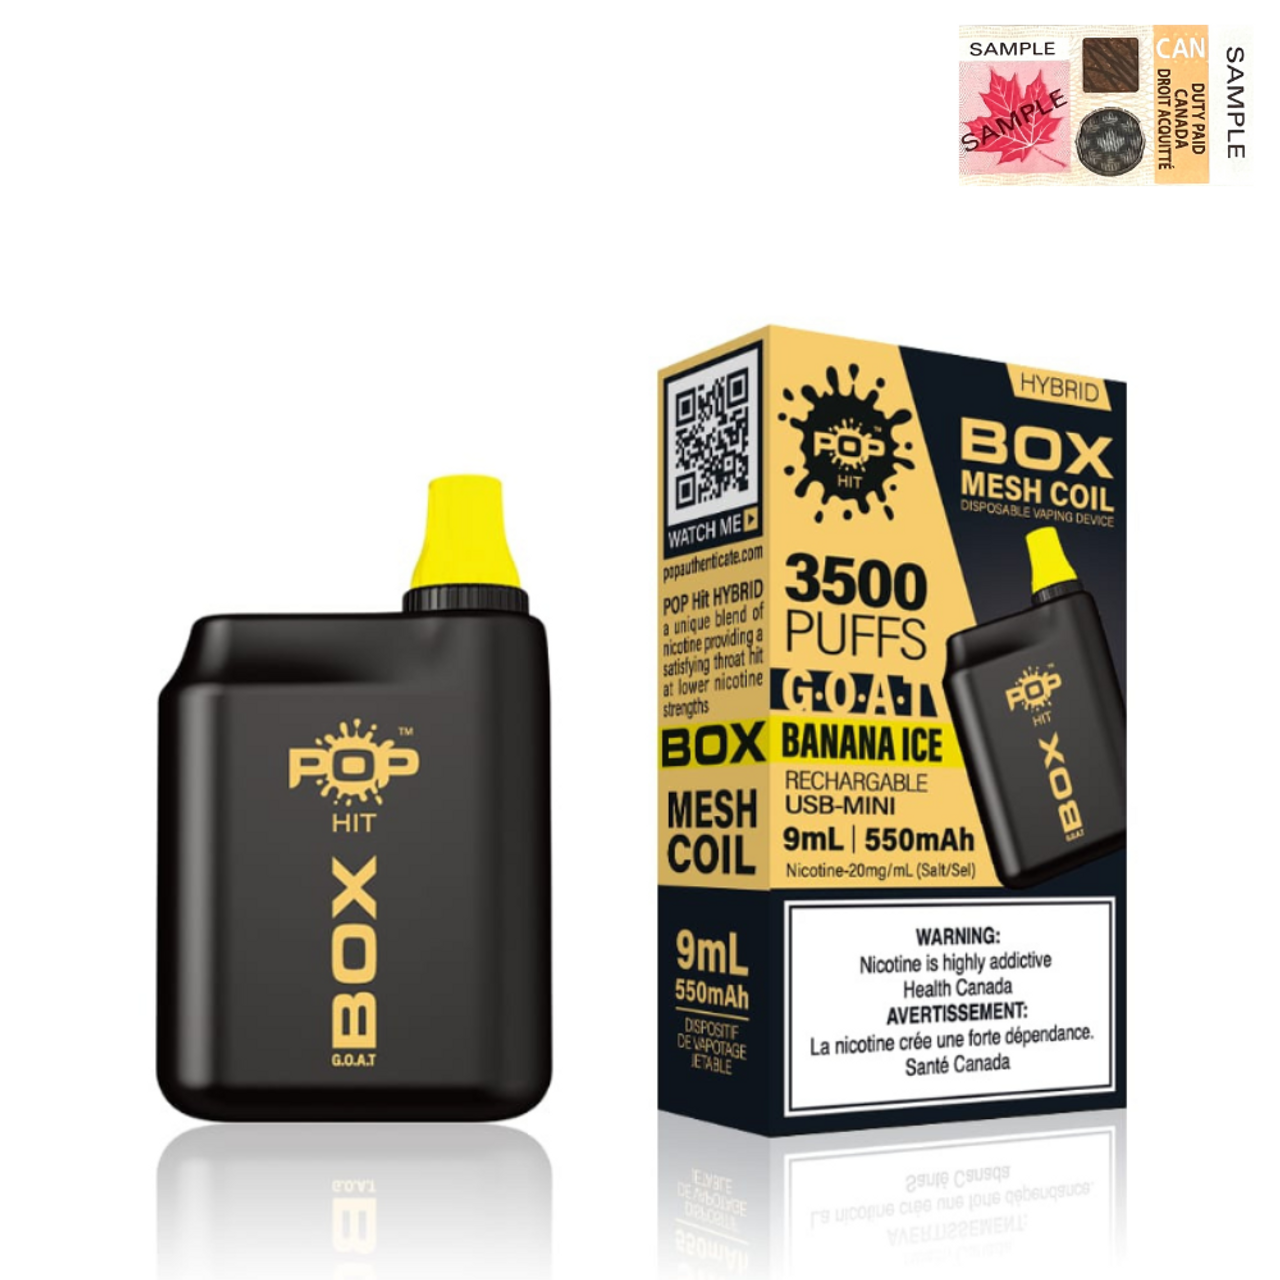 (Stamped) Banana Ice Pop Hybrid Box G.O.A.T 3500 Puffs Disposable Vape Ct-5